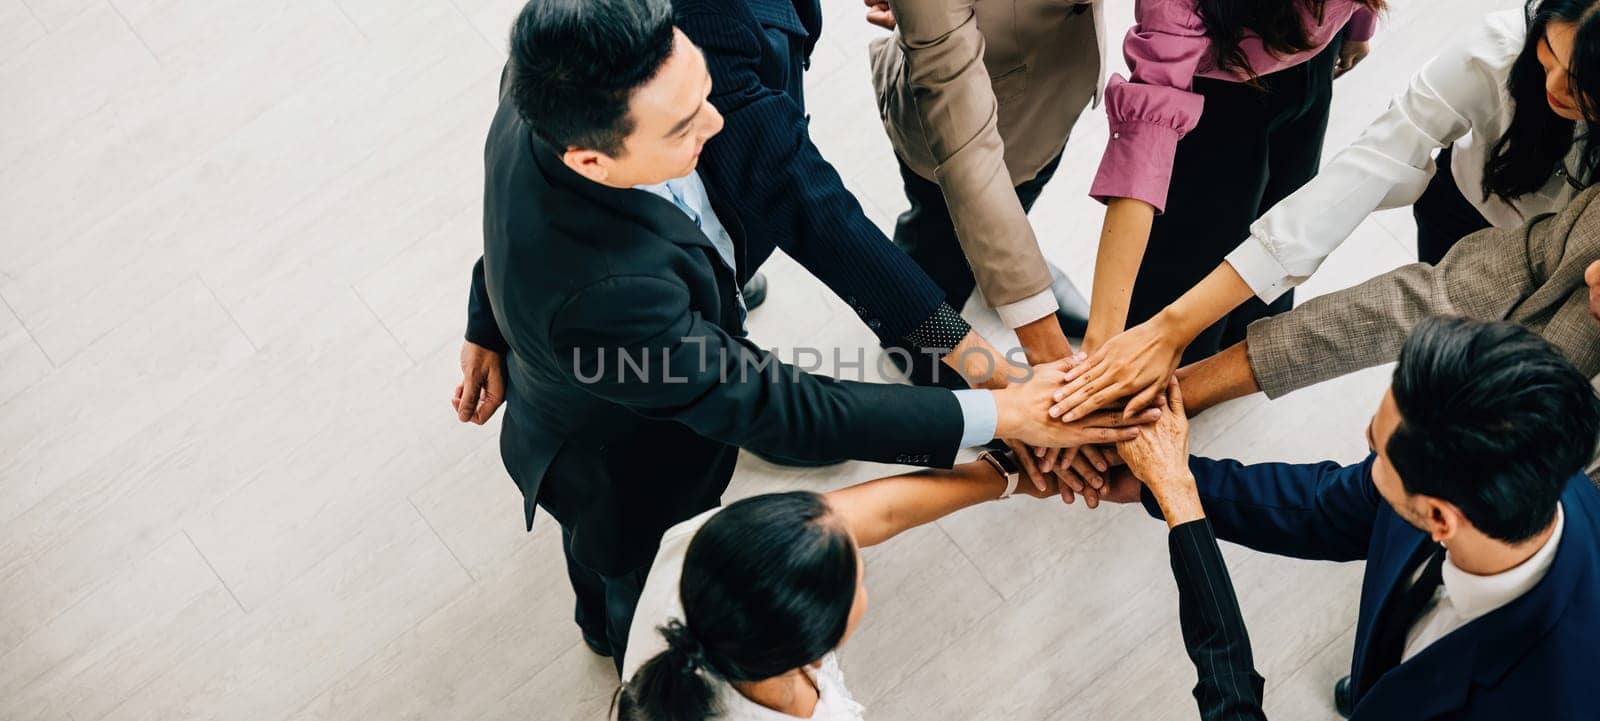 A top perspective reveals four diverse businesspeople standing in a circle stacking their hands. This image conveys the concepts of unity teamwork and global collaboration. by Sorapop